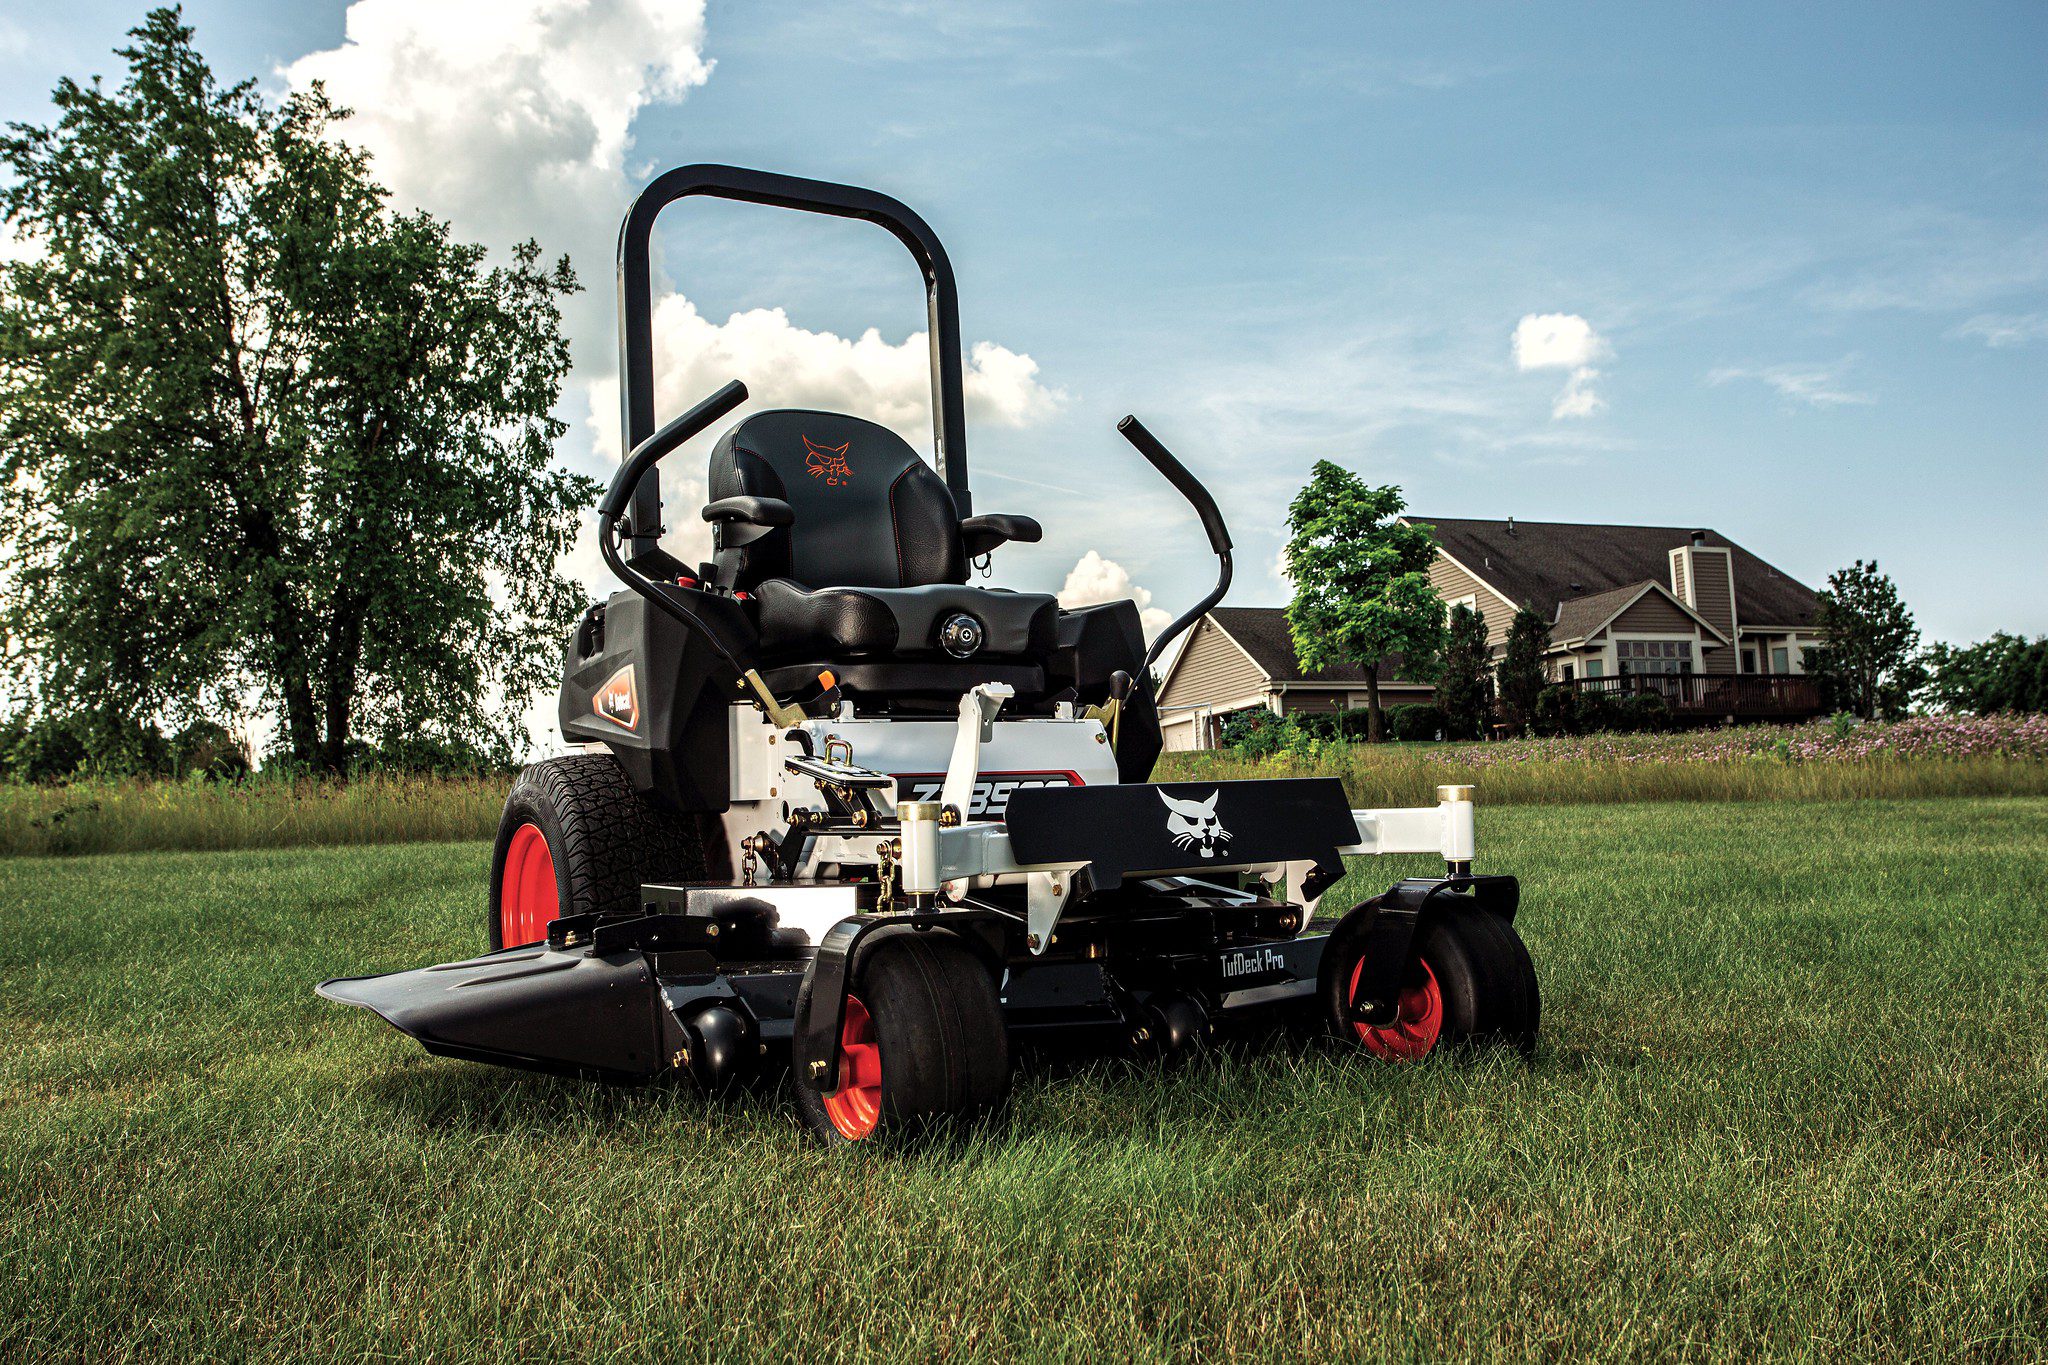 Browse Specs and more for the ZT3500 Zero-Turn Mower 48″ - K.C. Bobcat